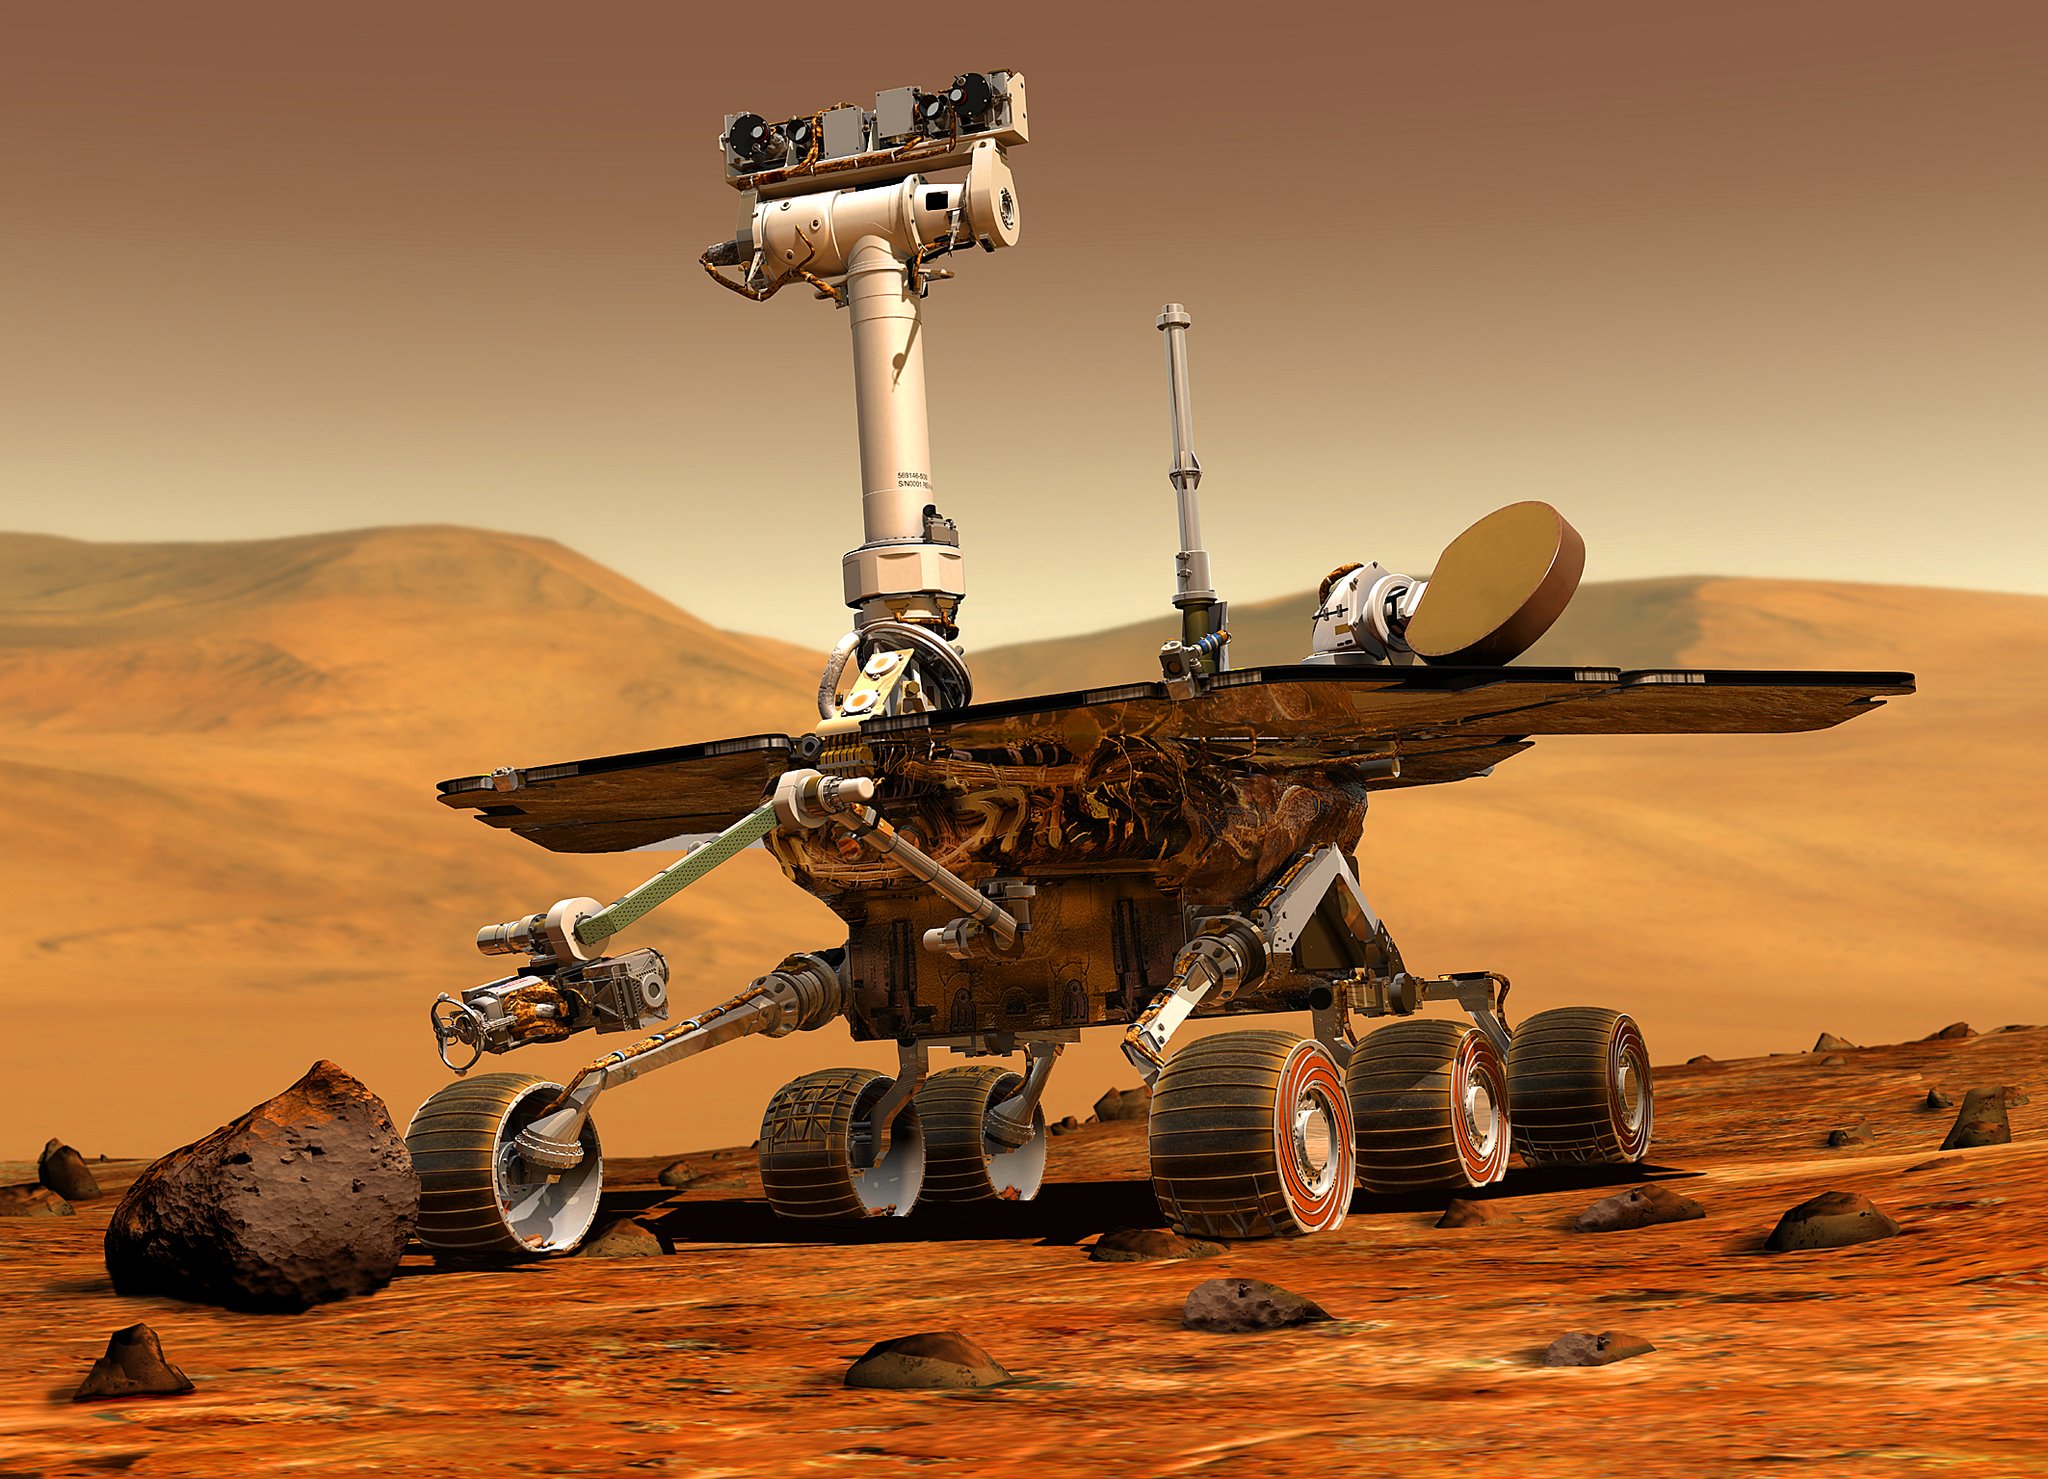 Over the past few weeks, NASA engineers tried to contact Opportunity several times